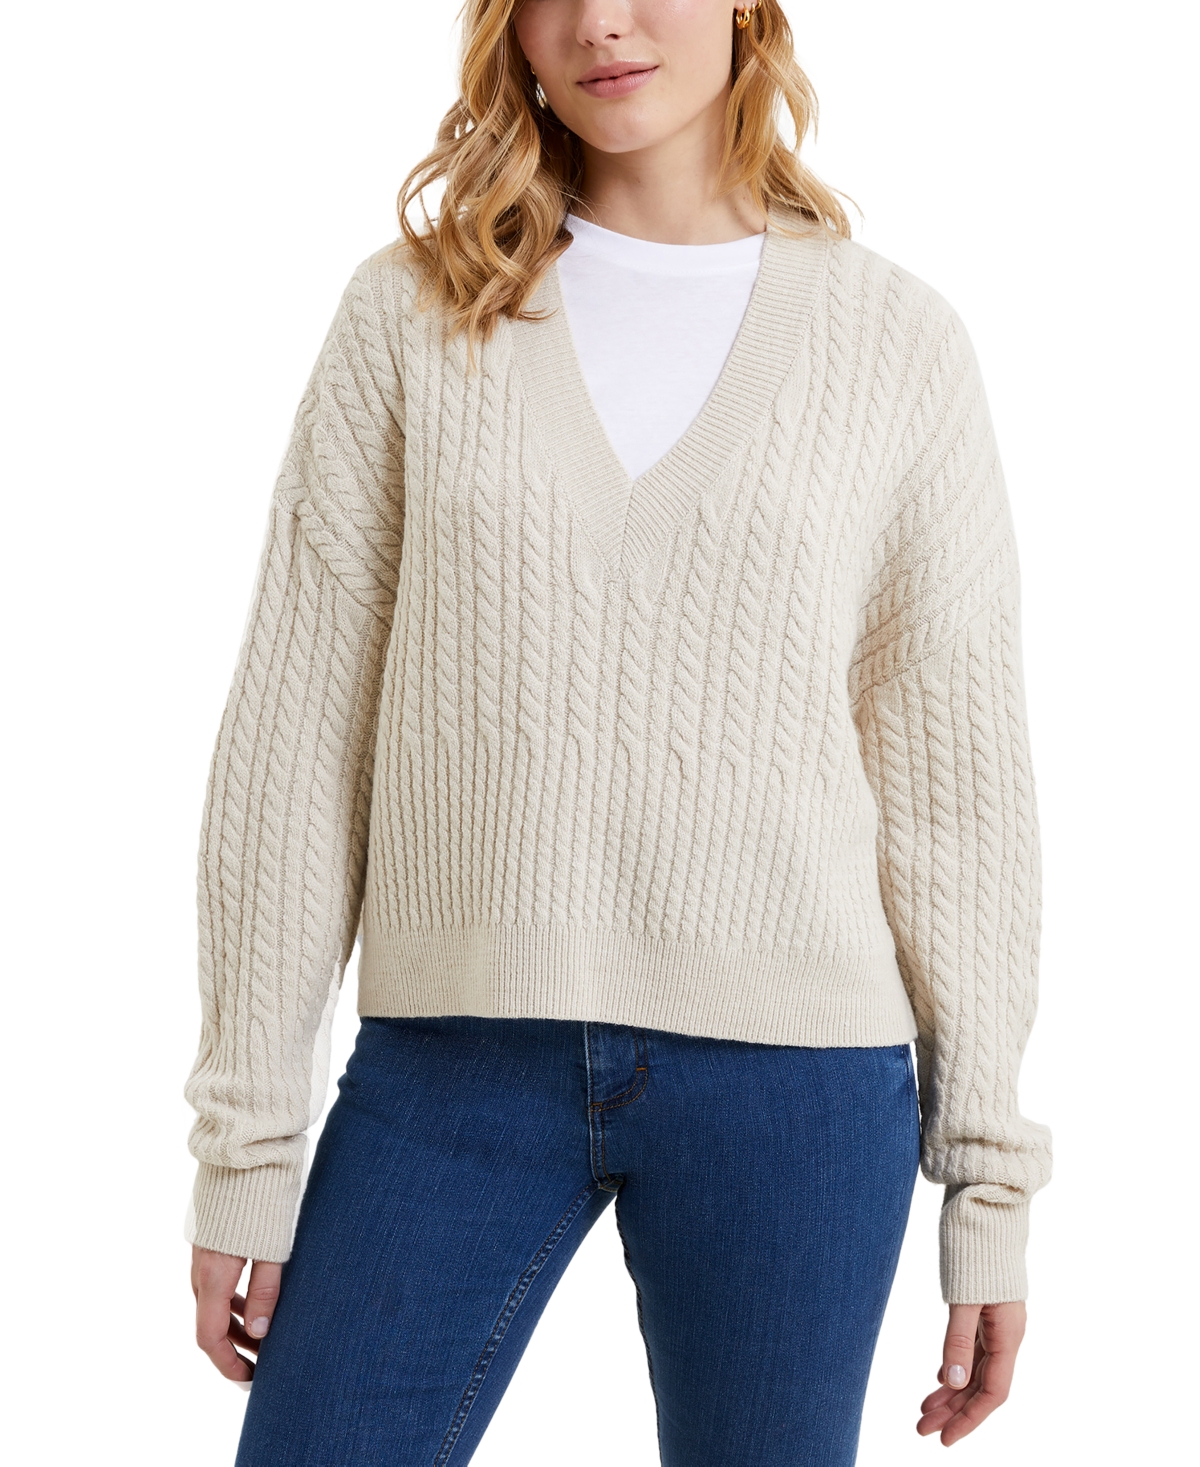 FRENCH CONNECTION WOMEN'S BABYSOFT CABLE-KNIT V-NECK SWEATER